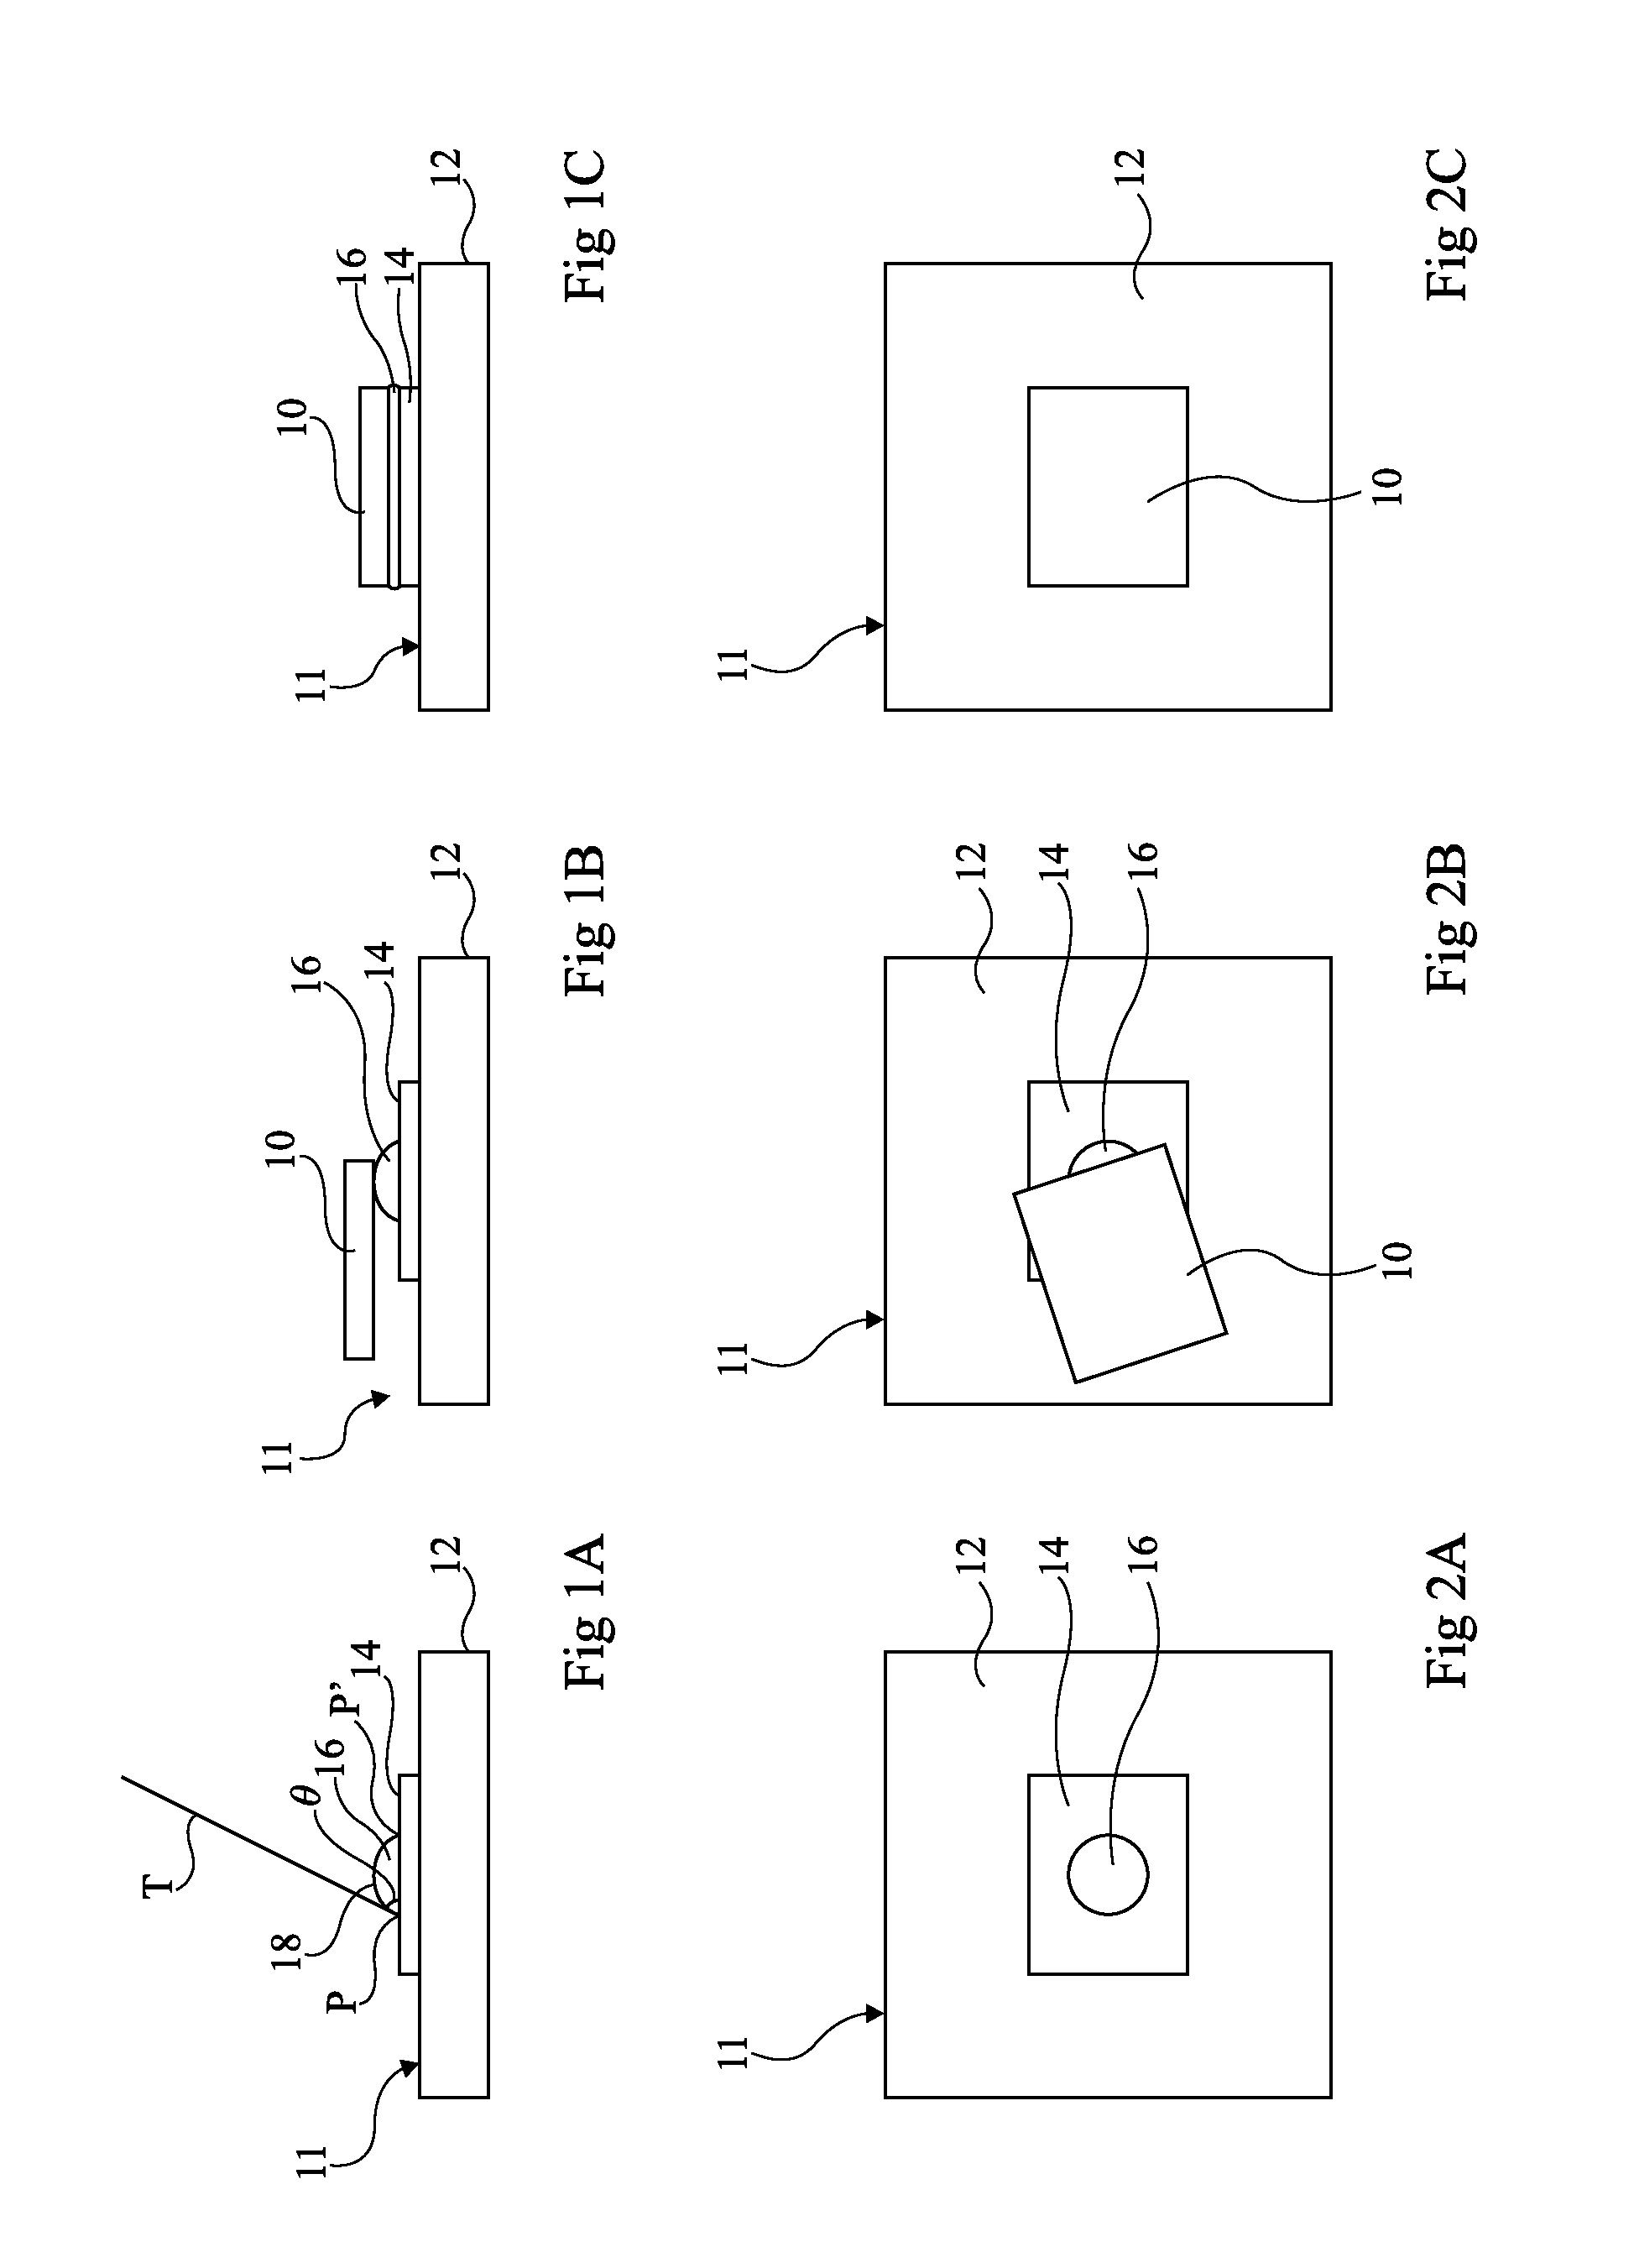 Method for producing at least one pad assembly on a support for the self-assembly of an integrated circuit chip on the support by the formation of a fluorinated material surrounding the pad and exposure of the pad and the fluorinated material to an ultraviolet treatment in the presence of ozone